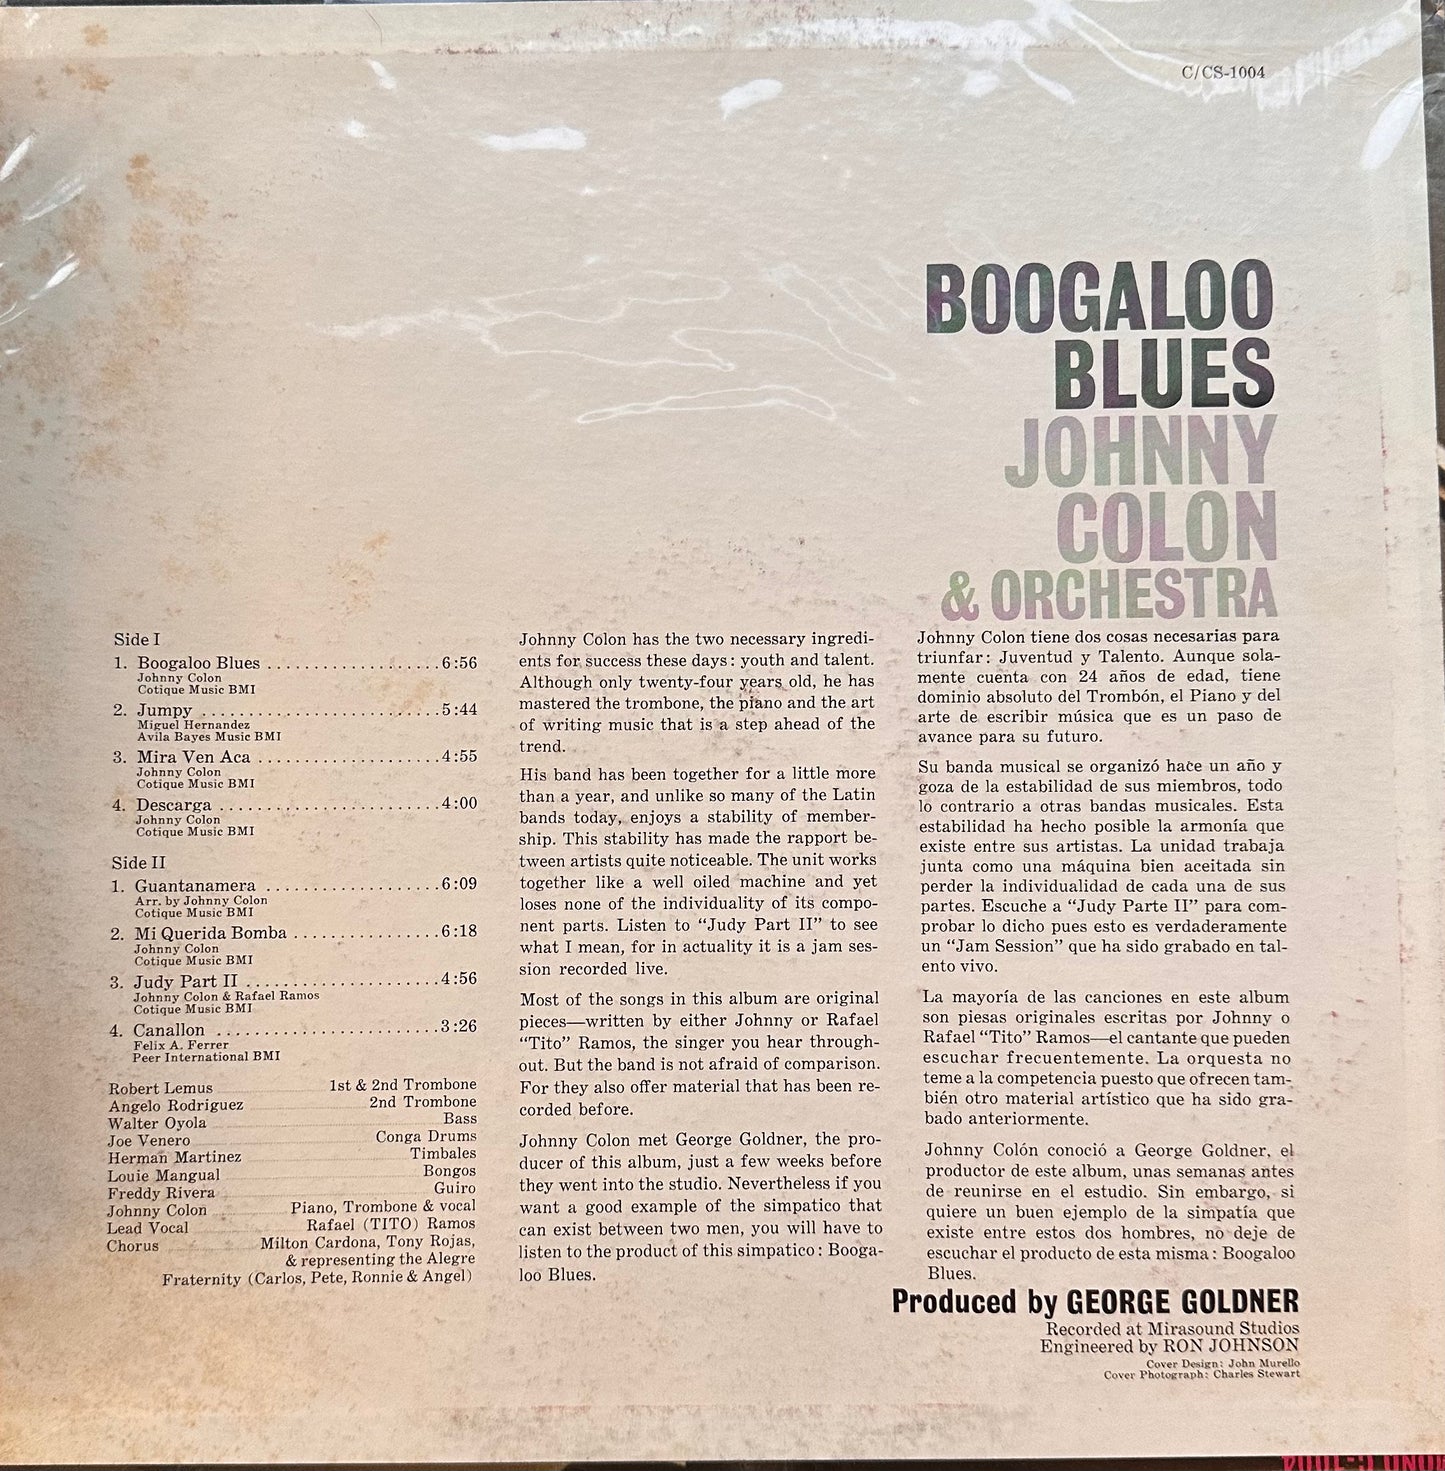 Boogaloo Blues - Johnny Colon & Orchestra